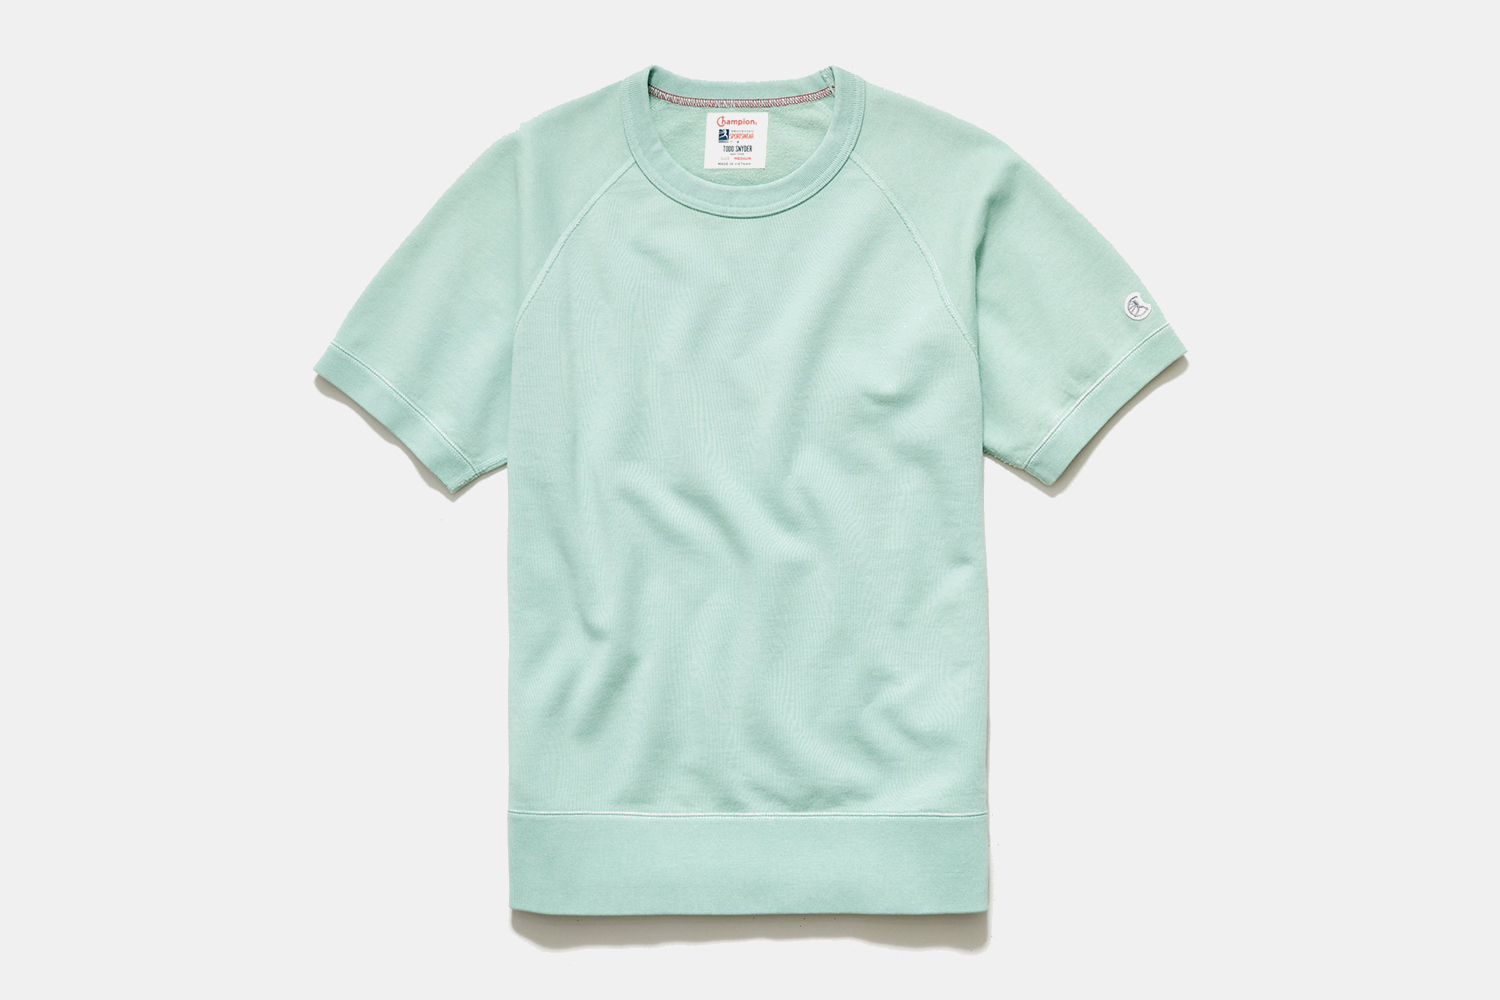 Deal: You Need a Short-Sleeve Sweatshirt. Todd Snyder’s Is 21% Off.